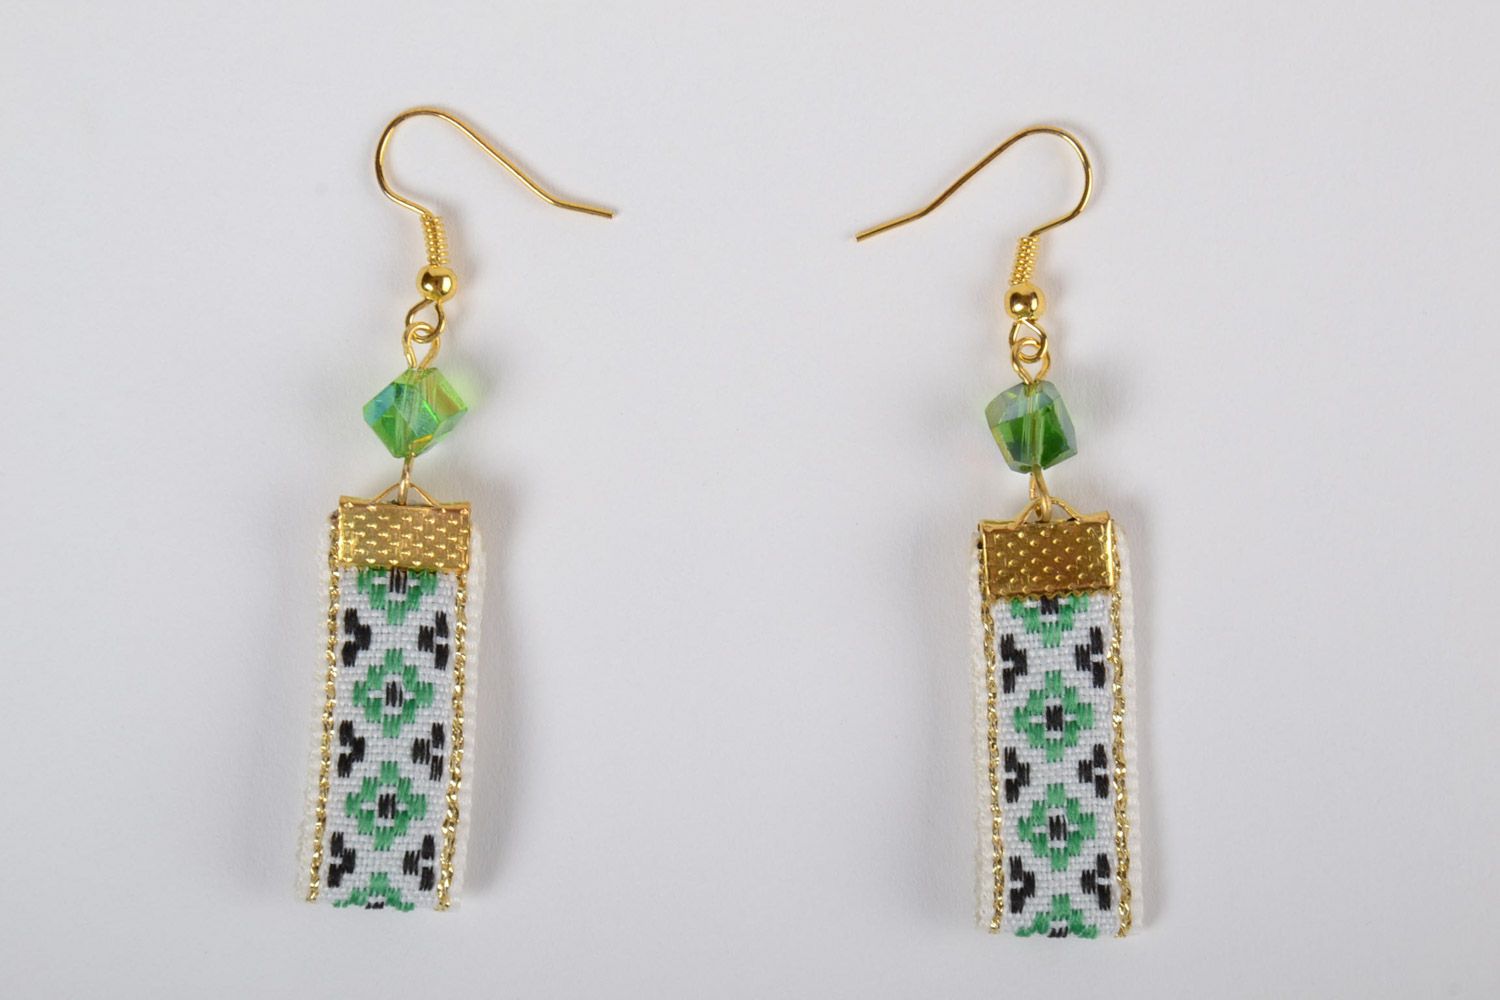 Handmade lace earrings with beads in ethnic Ukrainian style for women photo 3